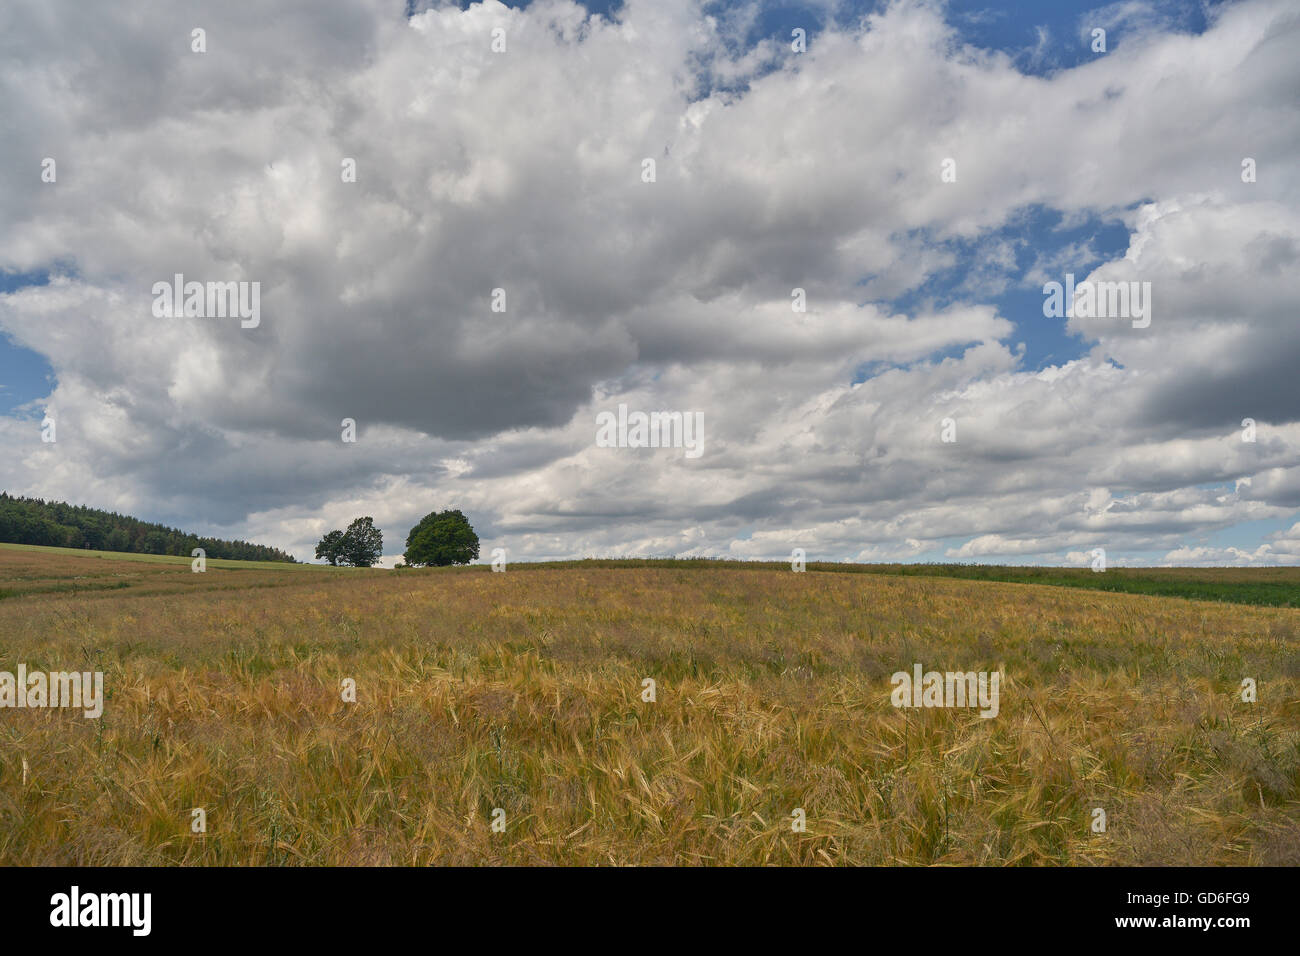 Picturesque clouds over fields of ripening grain Lower Silesia Poland Stock Photo